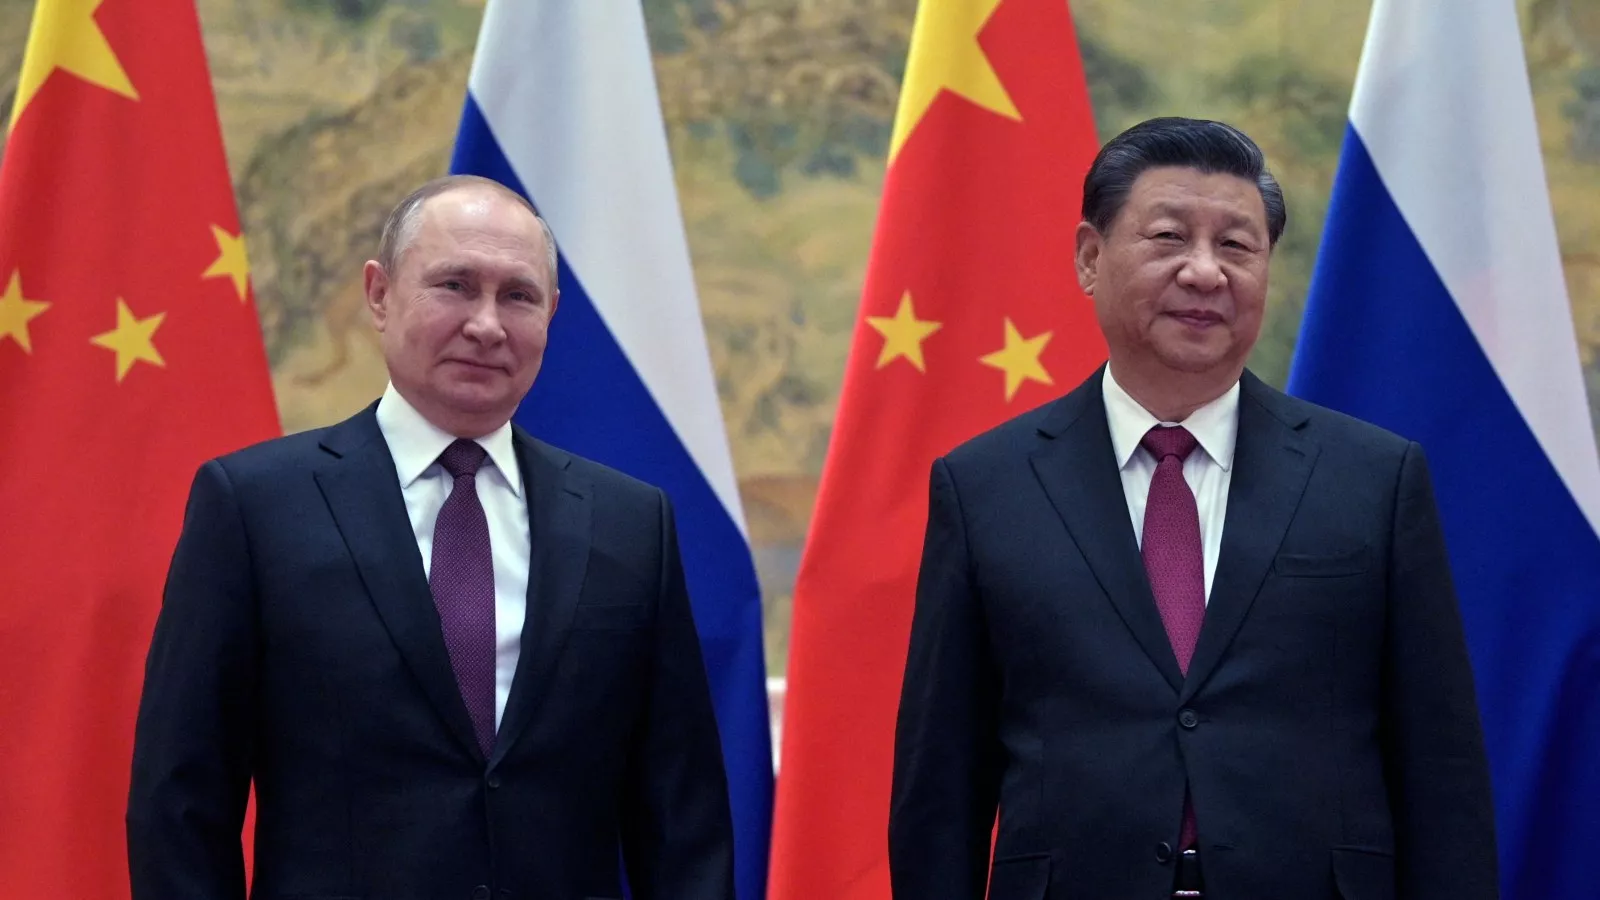 China joining Russia military exercise to help address "security threats"